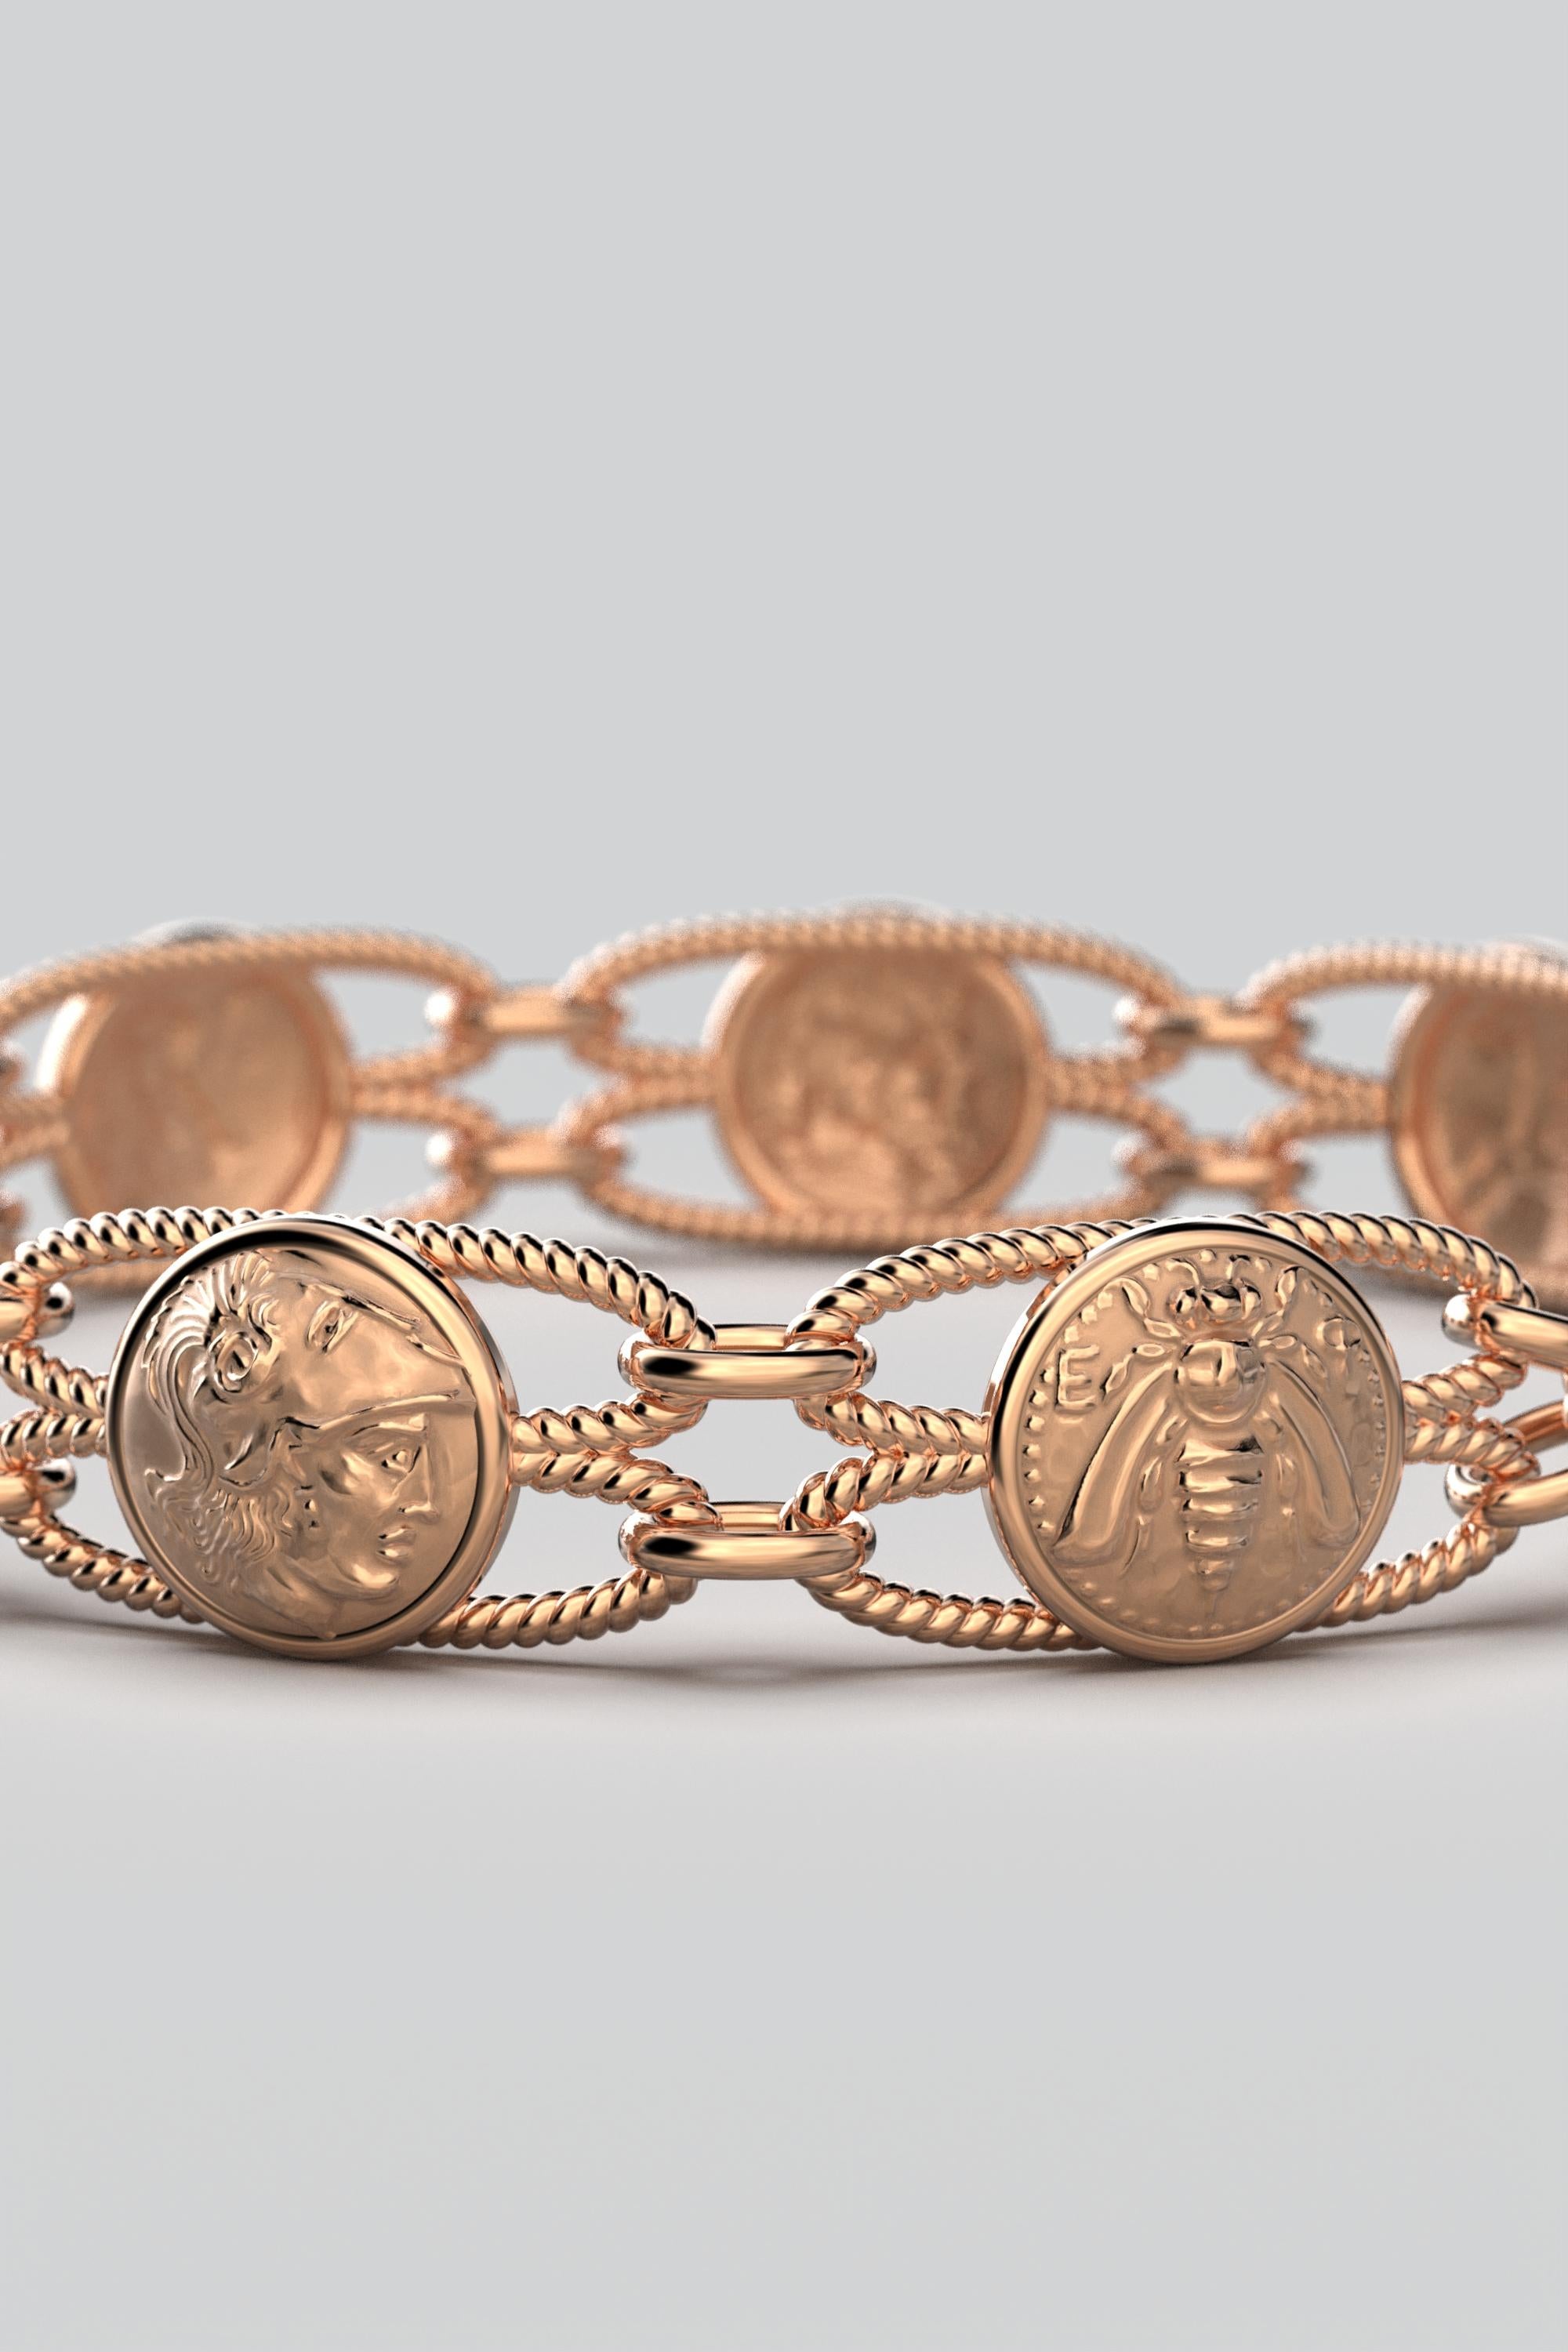 18k Gold Italian Bracelet Made in Italy by Oltremare Gioielli, Greek Style Coin For Sale 1